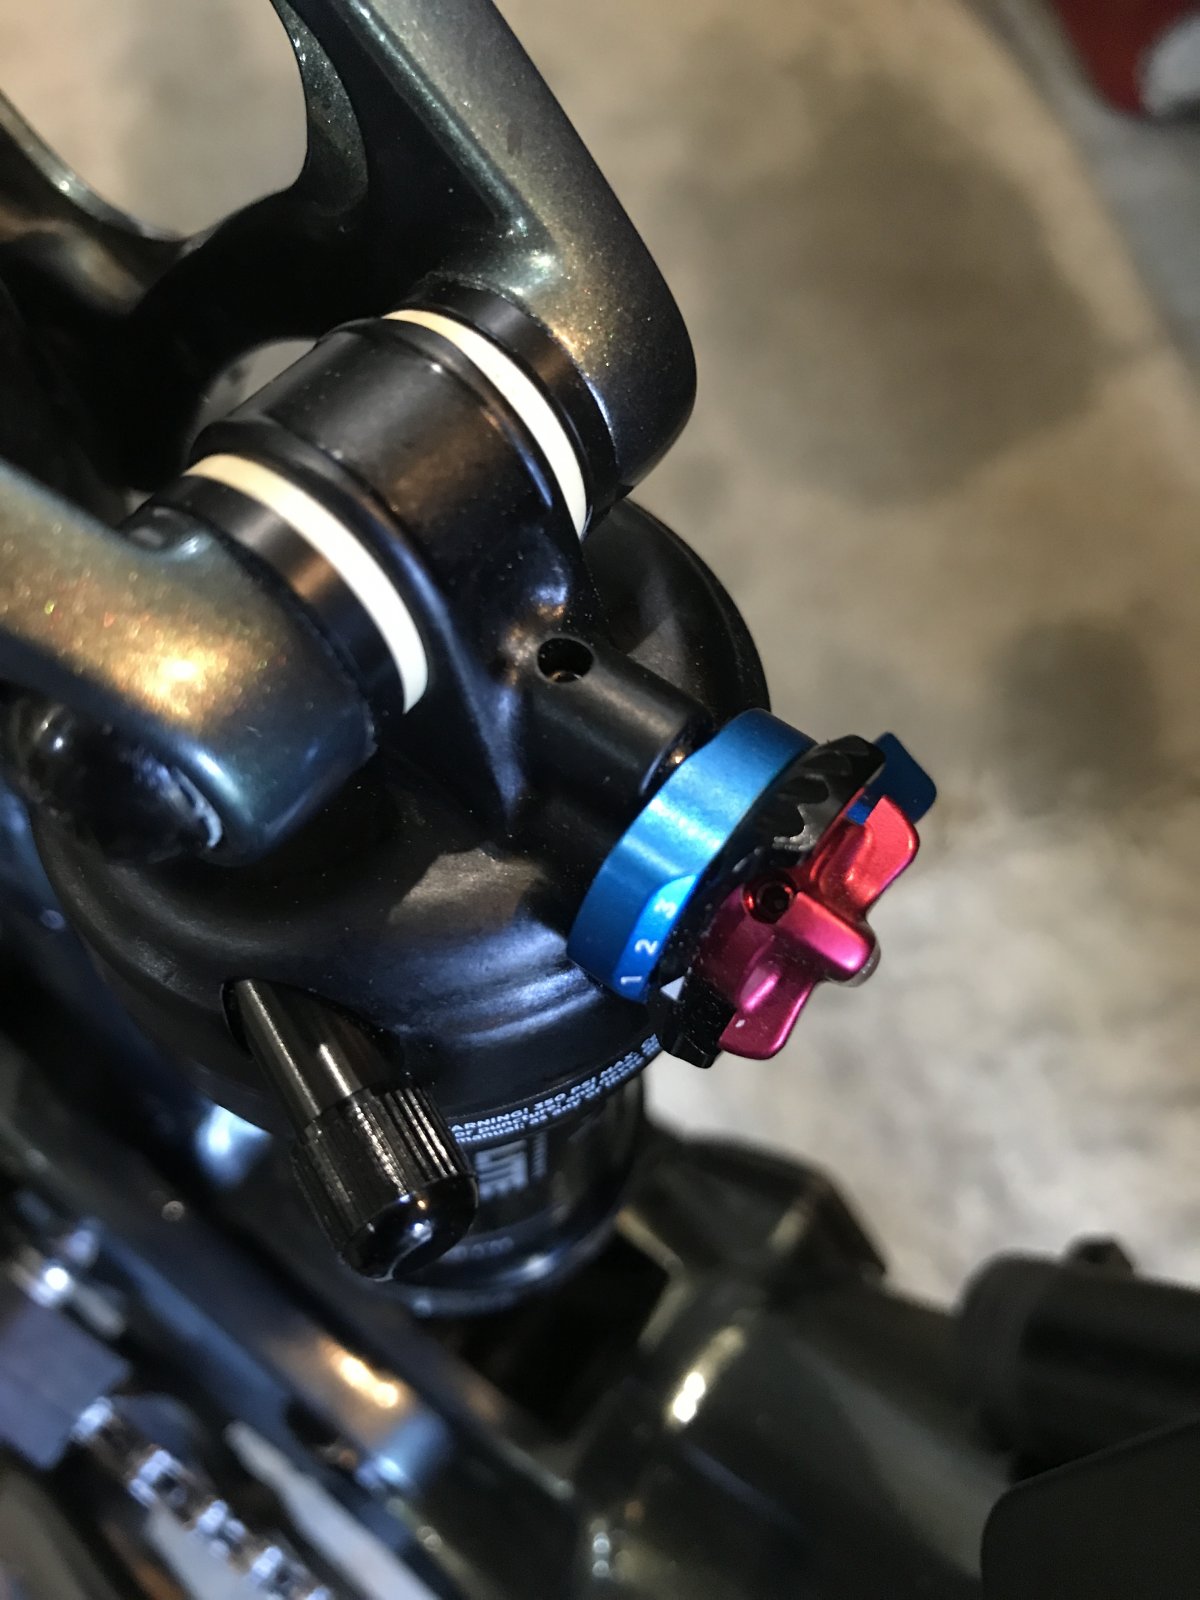 Stance rear shock replacement questions | EMTB Forums